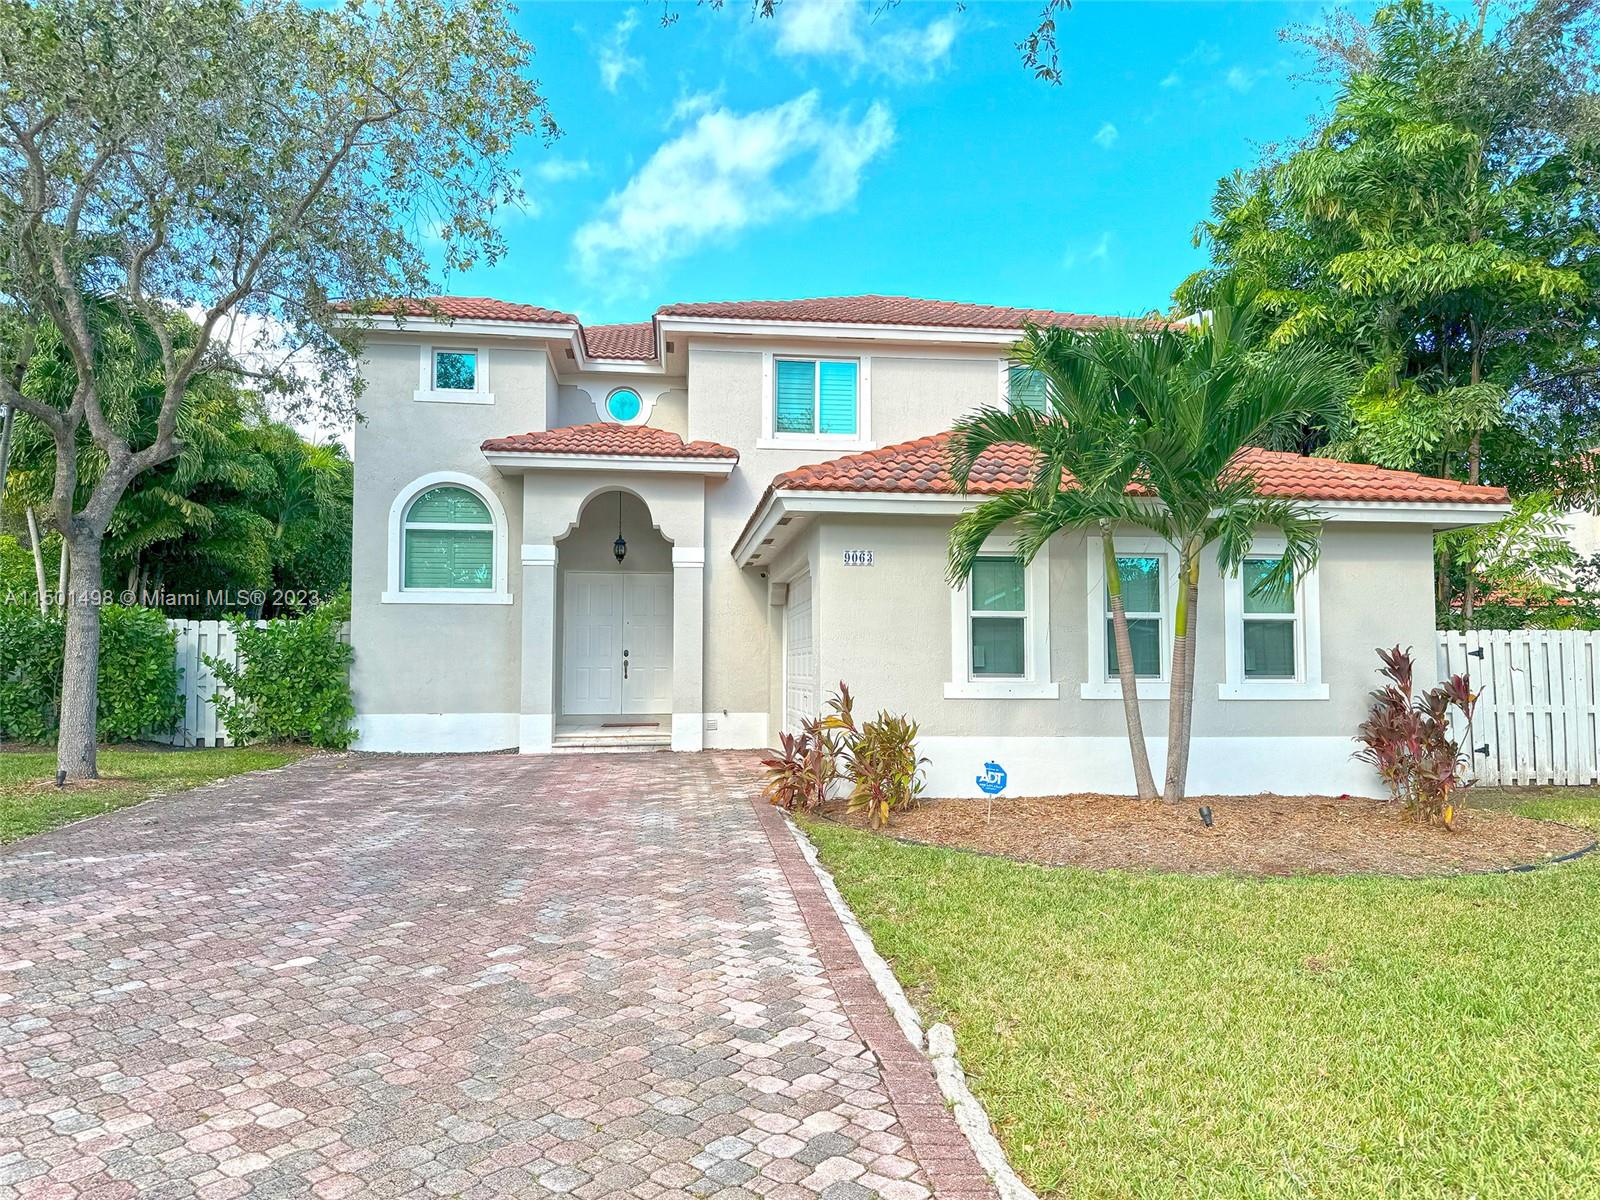 9063 SW 163rd Ter, Palmetto Bay, Florida 33157, 6 Bedrooms Bedrooms, ,4 BathroomsBathrooms,Residentiallease,For Rent,9063 SW 163rd Ter,A11501498